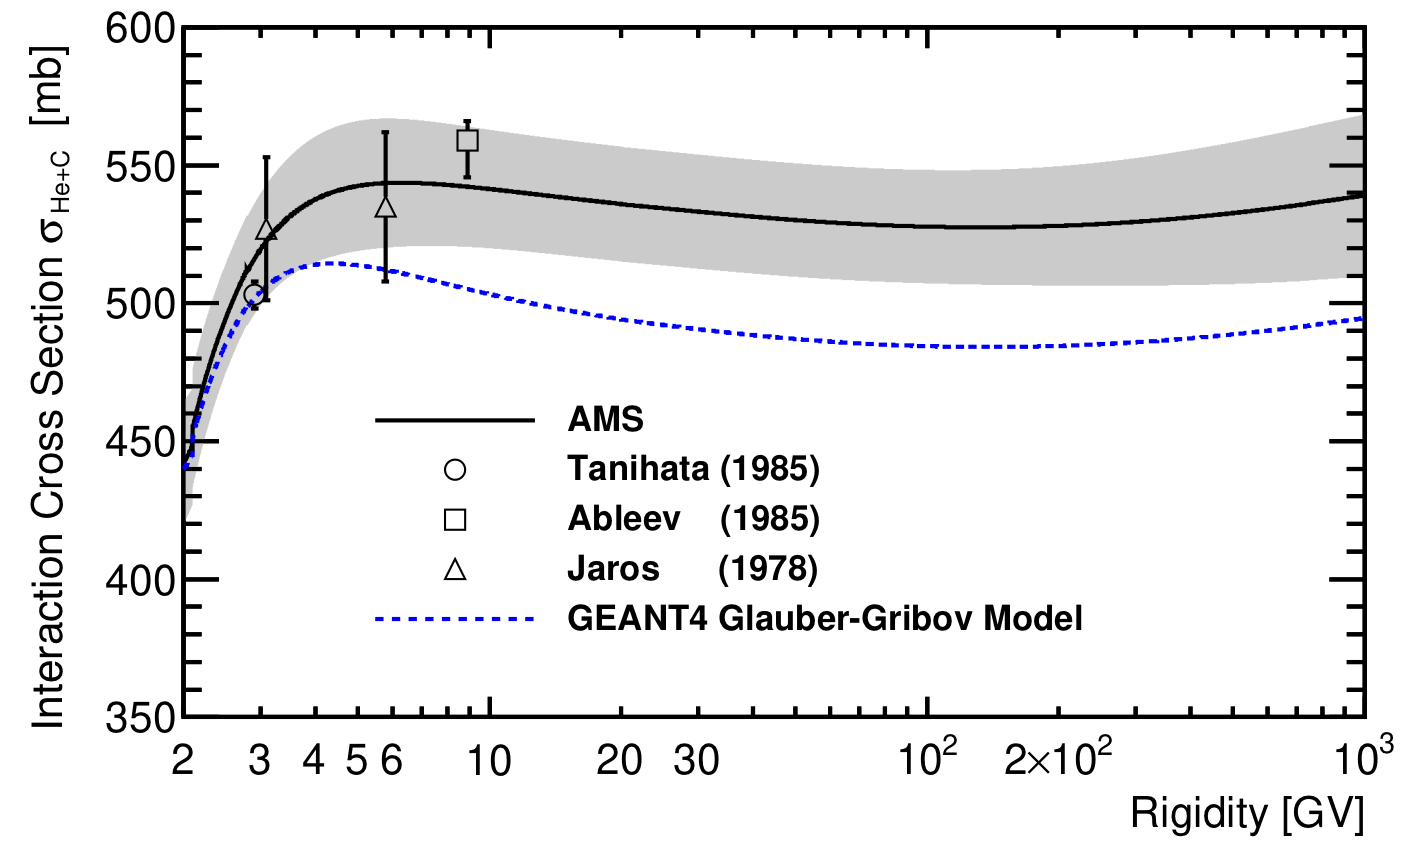 The He+C cross section measured by AMS in space